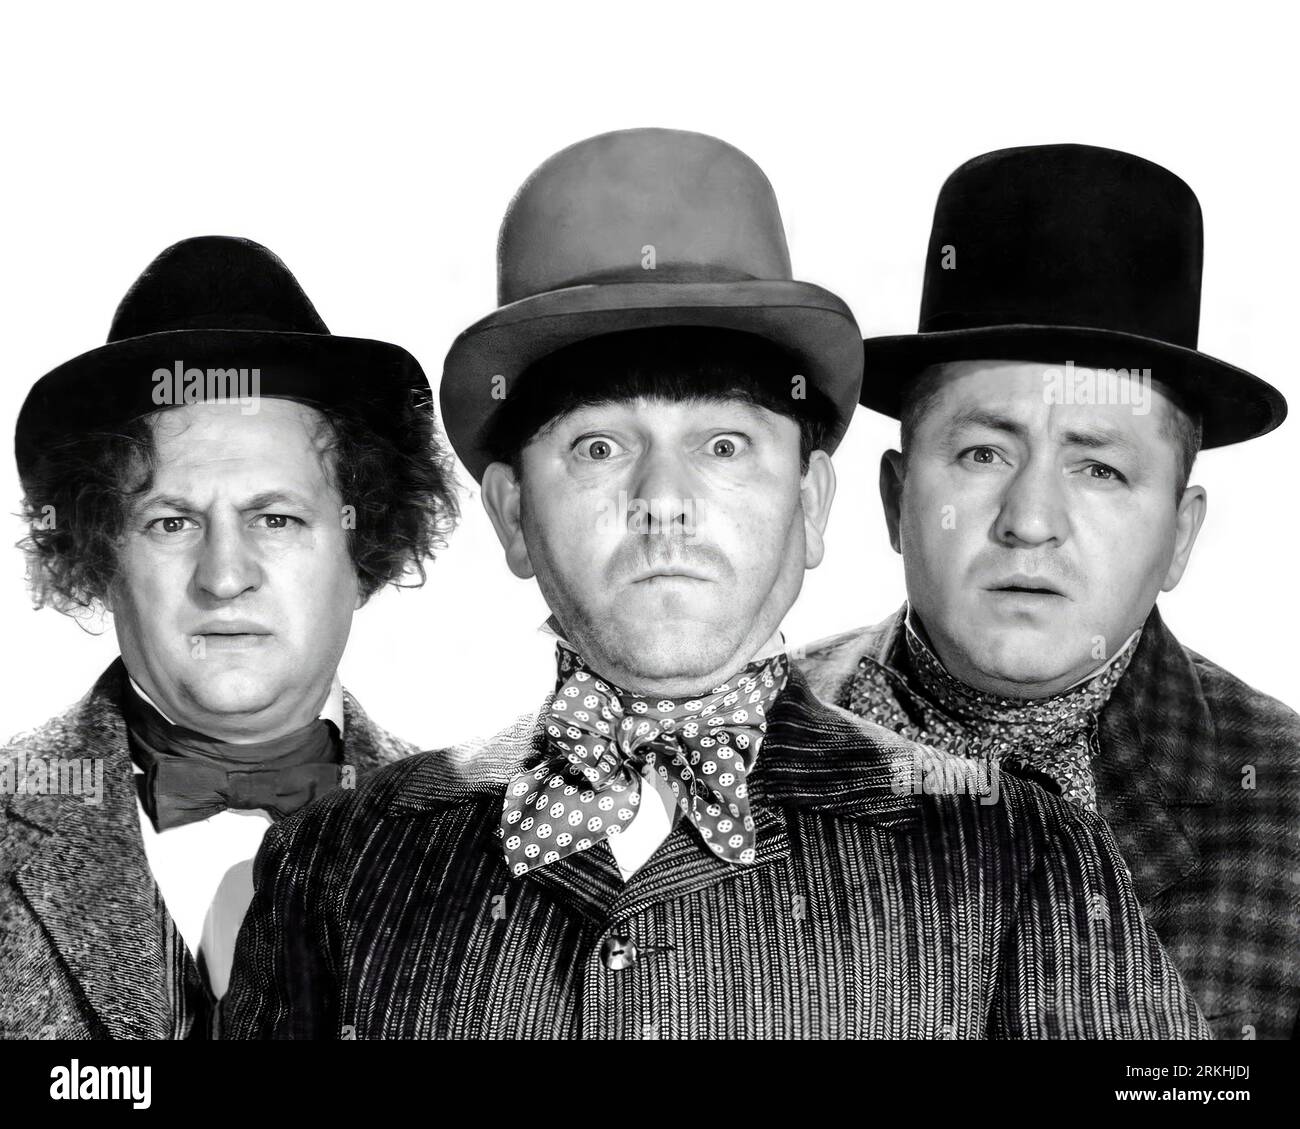 MOE HOWARD, LARRY FINE, CURLY HOWARD and THE THREE STOOGES in UNCIVIL WAR BIRDS (1946), directed by JULES WHITE. Credit: COLUMBIA PICTURES / Album Stock Photo